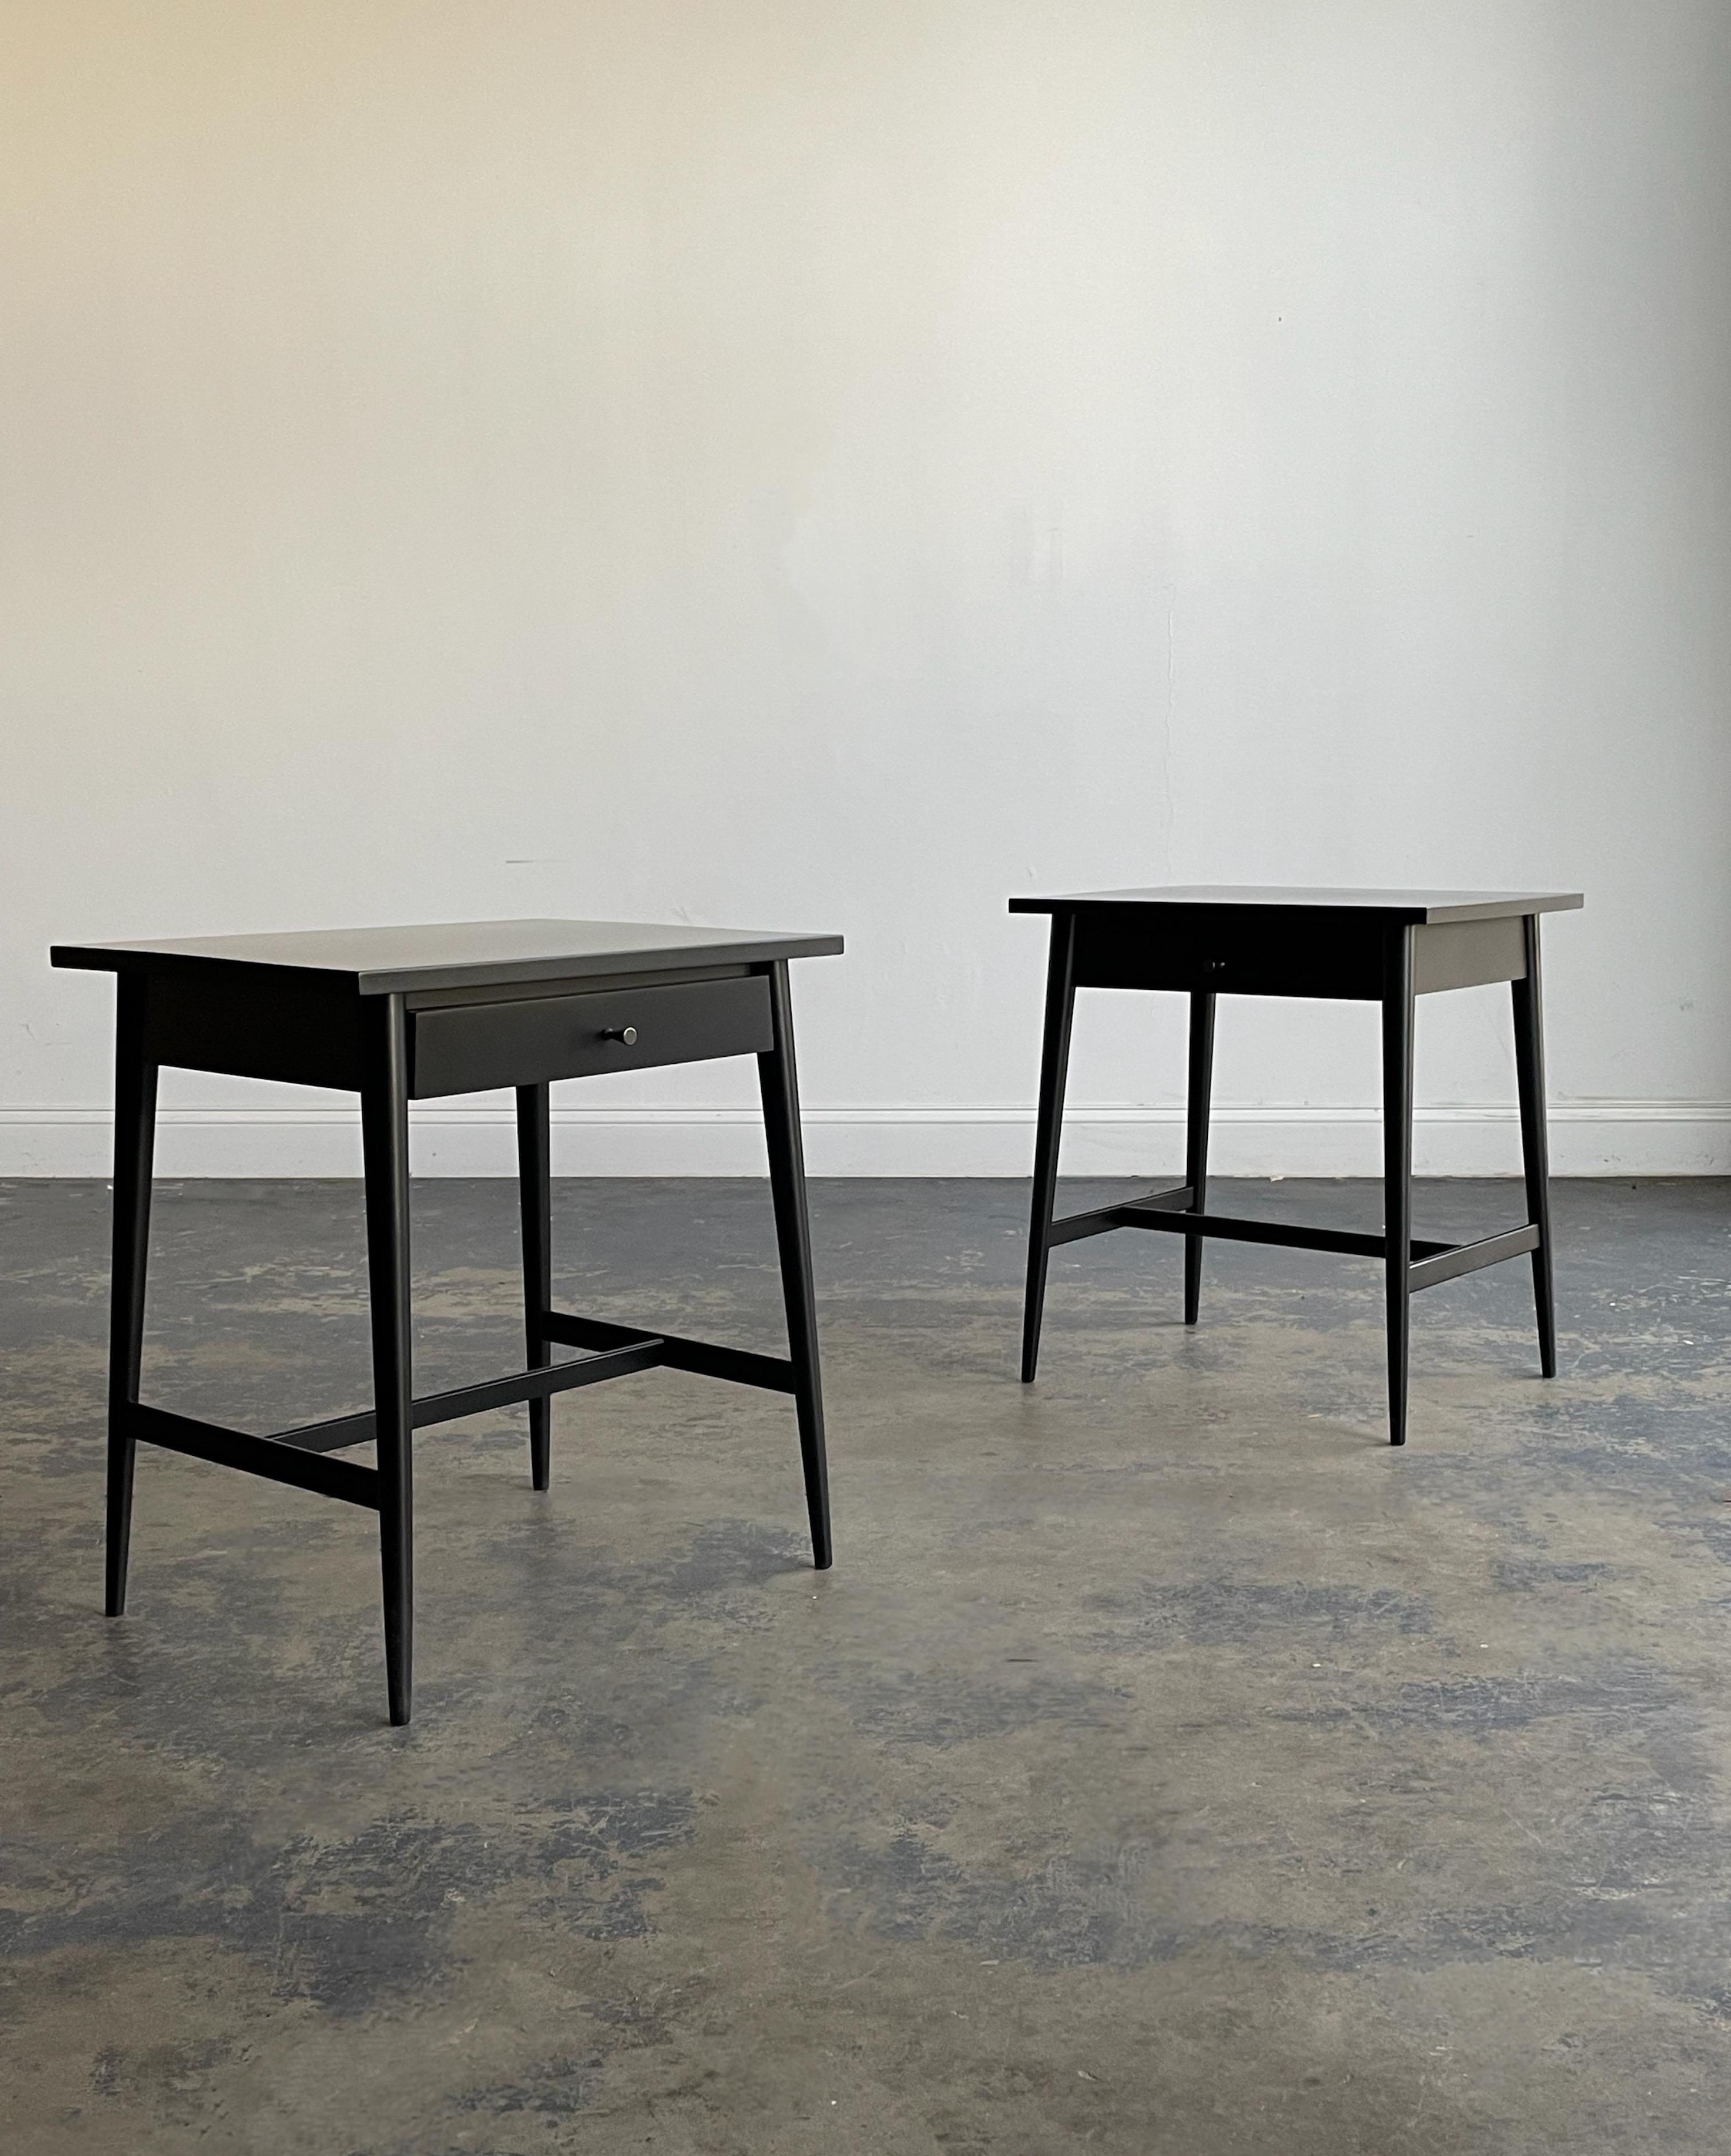 Pair of nightstands or end tables designed by Paul McCobb for his planner group line. Freshly ebonizedin a satin black finish. Drawer pulls have been cleaned as well. Some wear to interior of drawers.